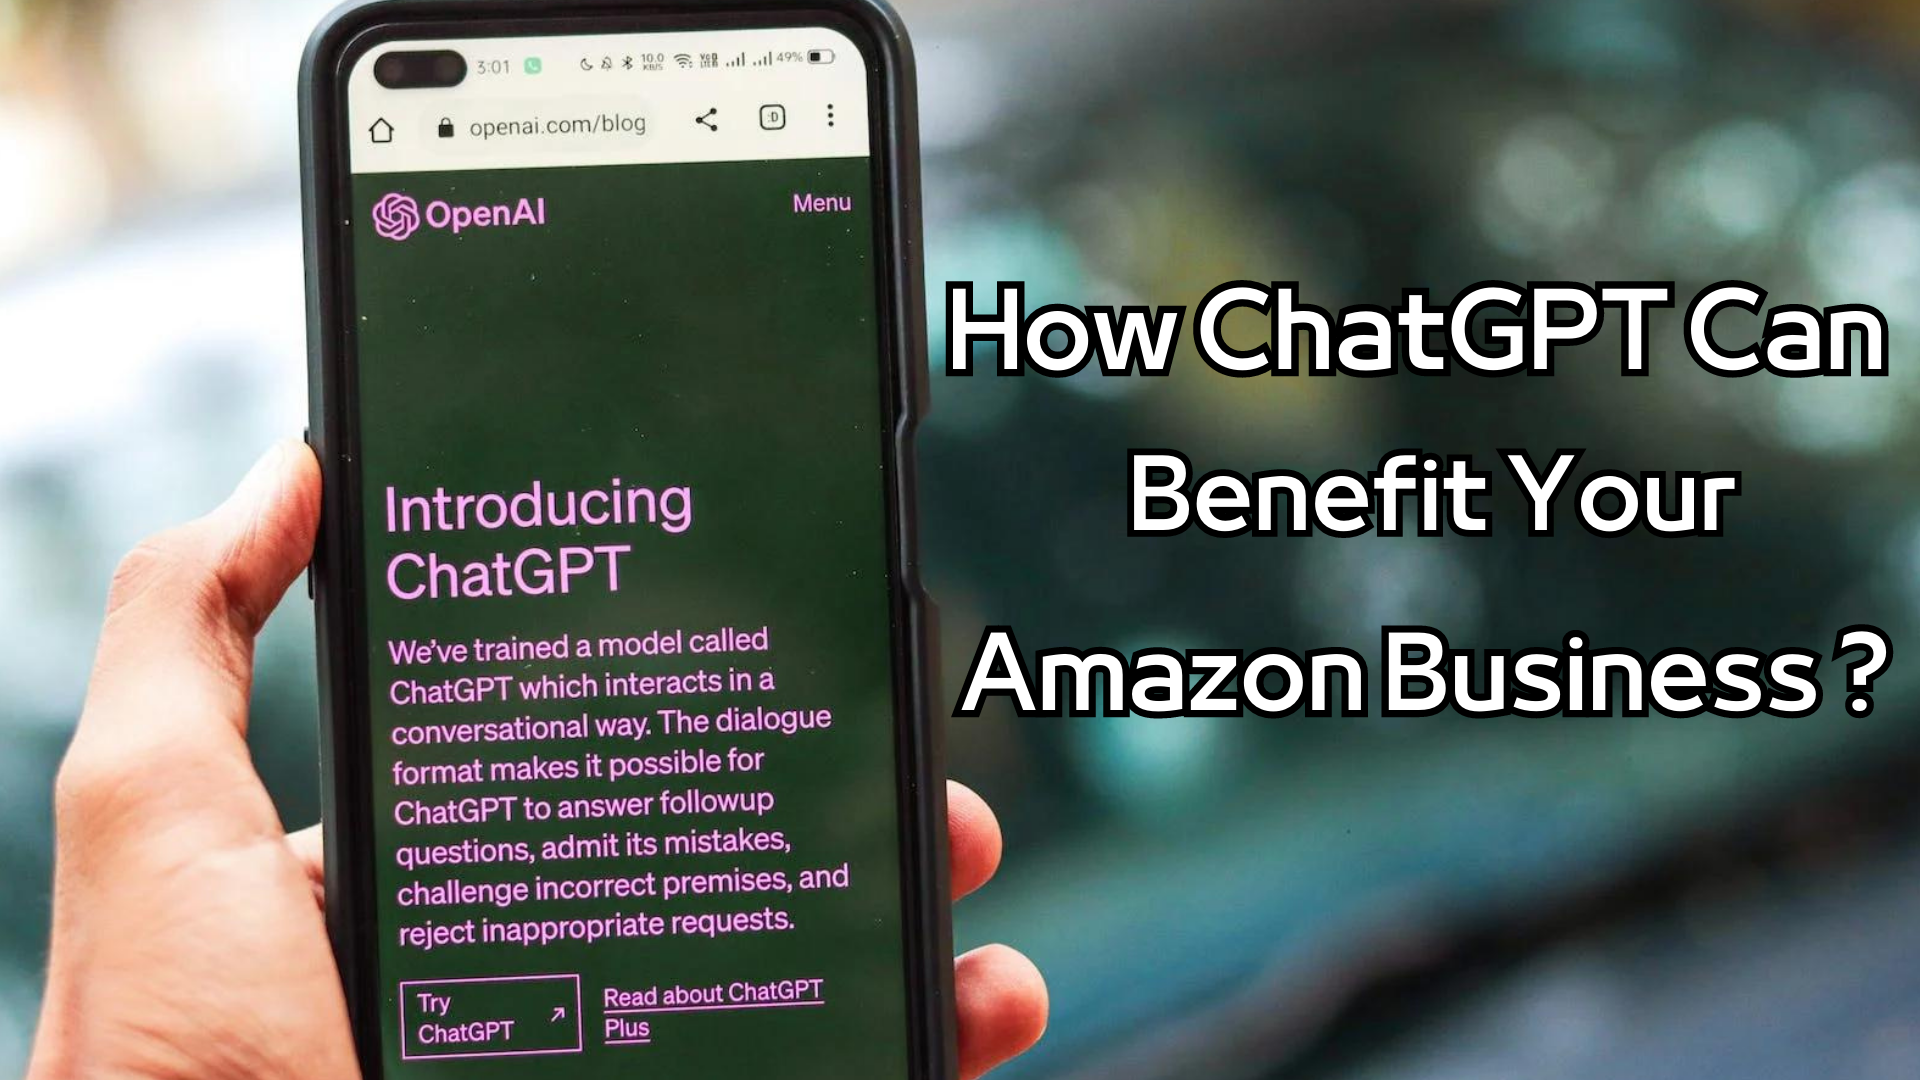 How ChatGPT Can Benefit Your Amazon Business